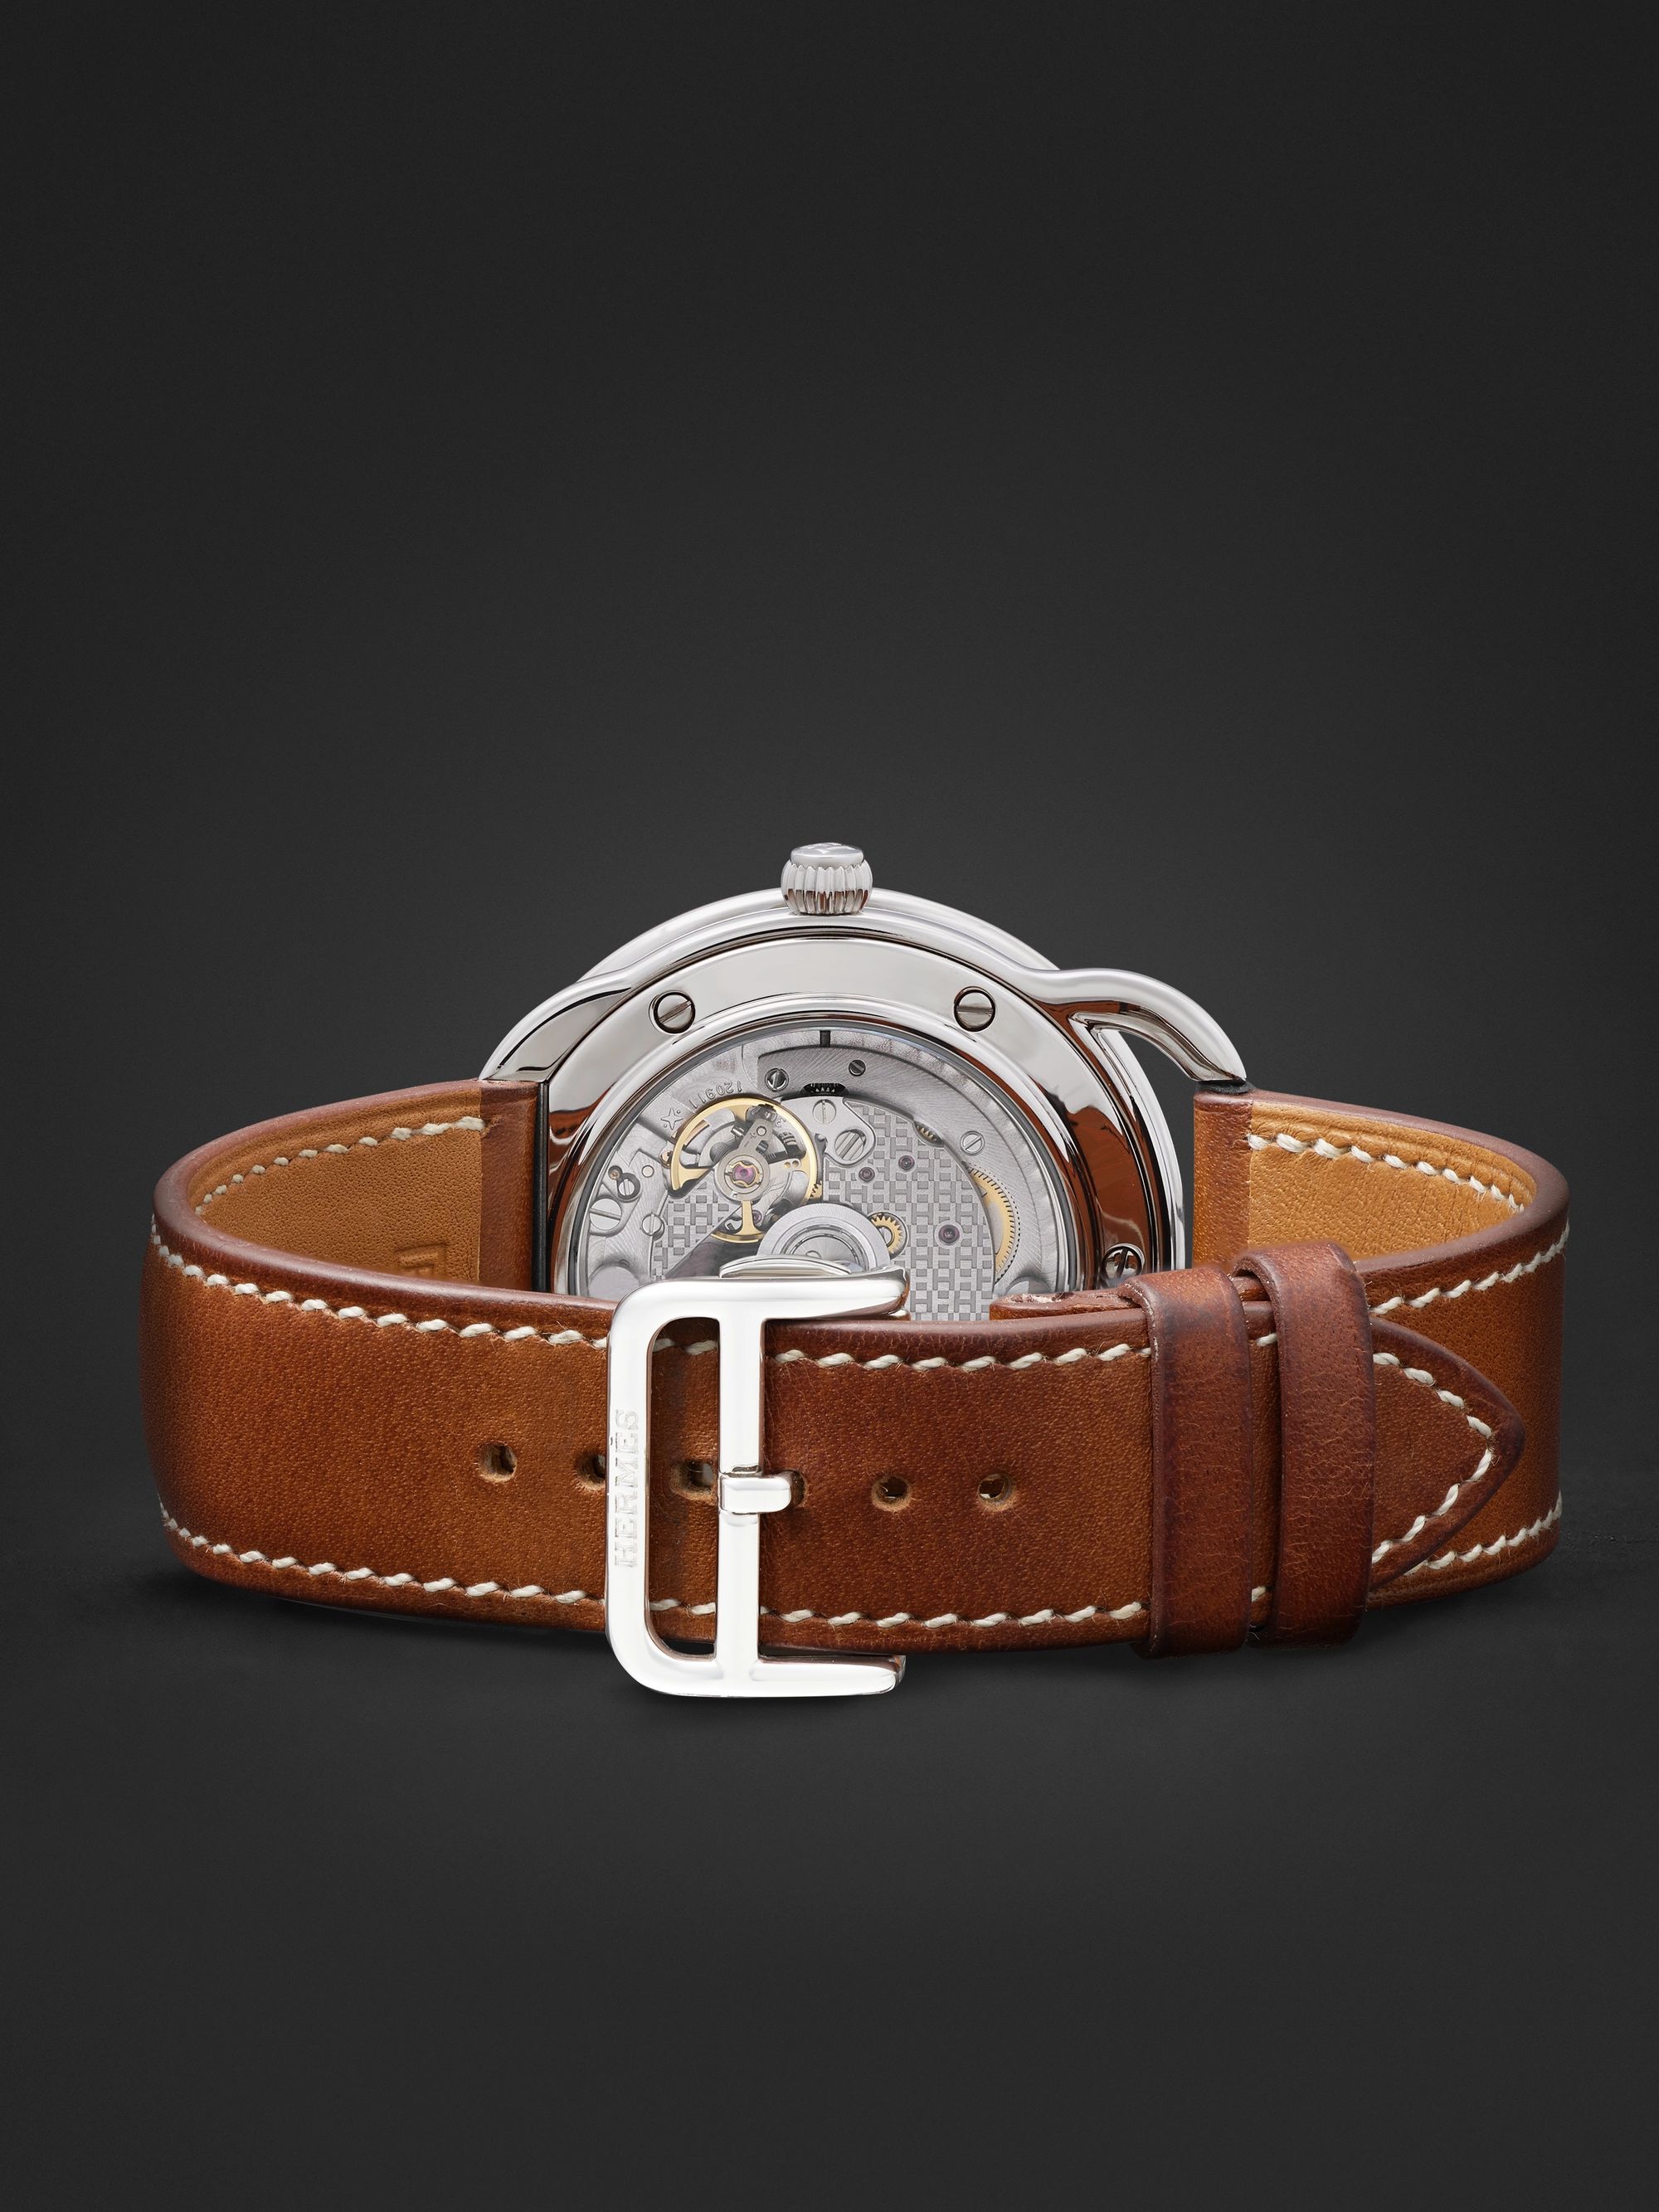 HERMÈS TIMEPIECES Arceau Automatic 40mm Stainless Steel and Leather Watch, Ref. No. 055473WW00